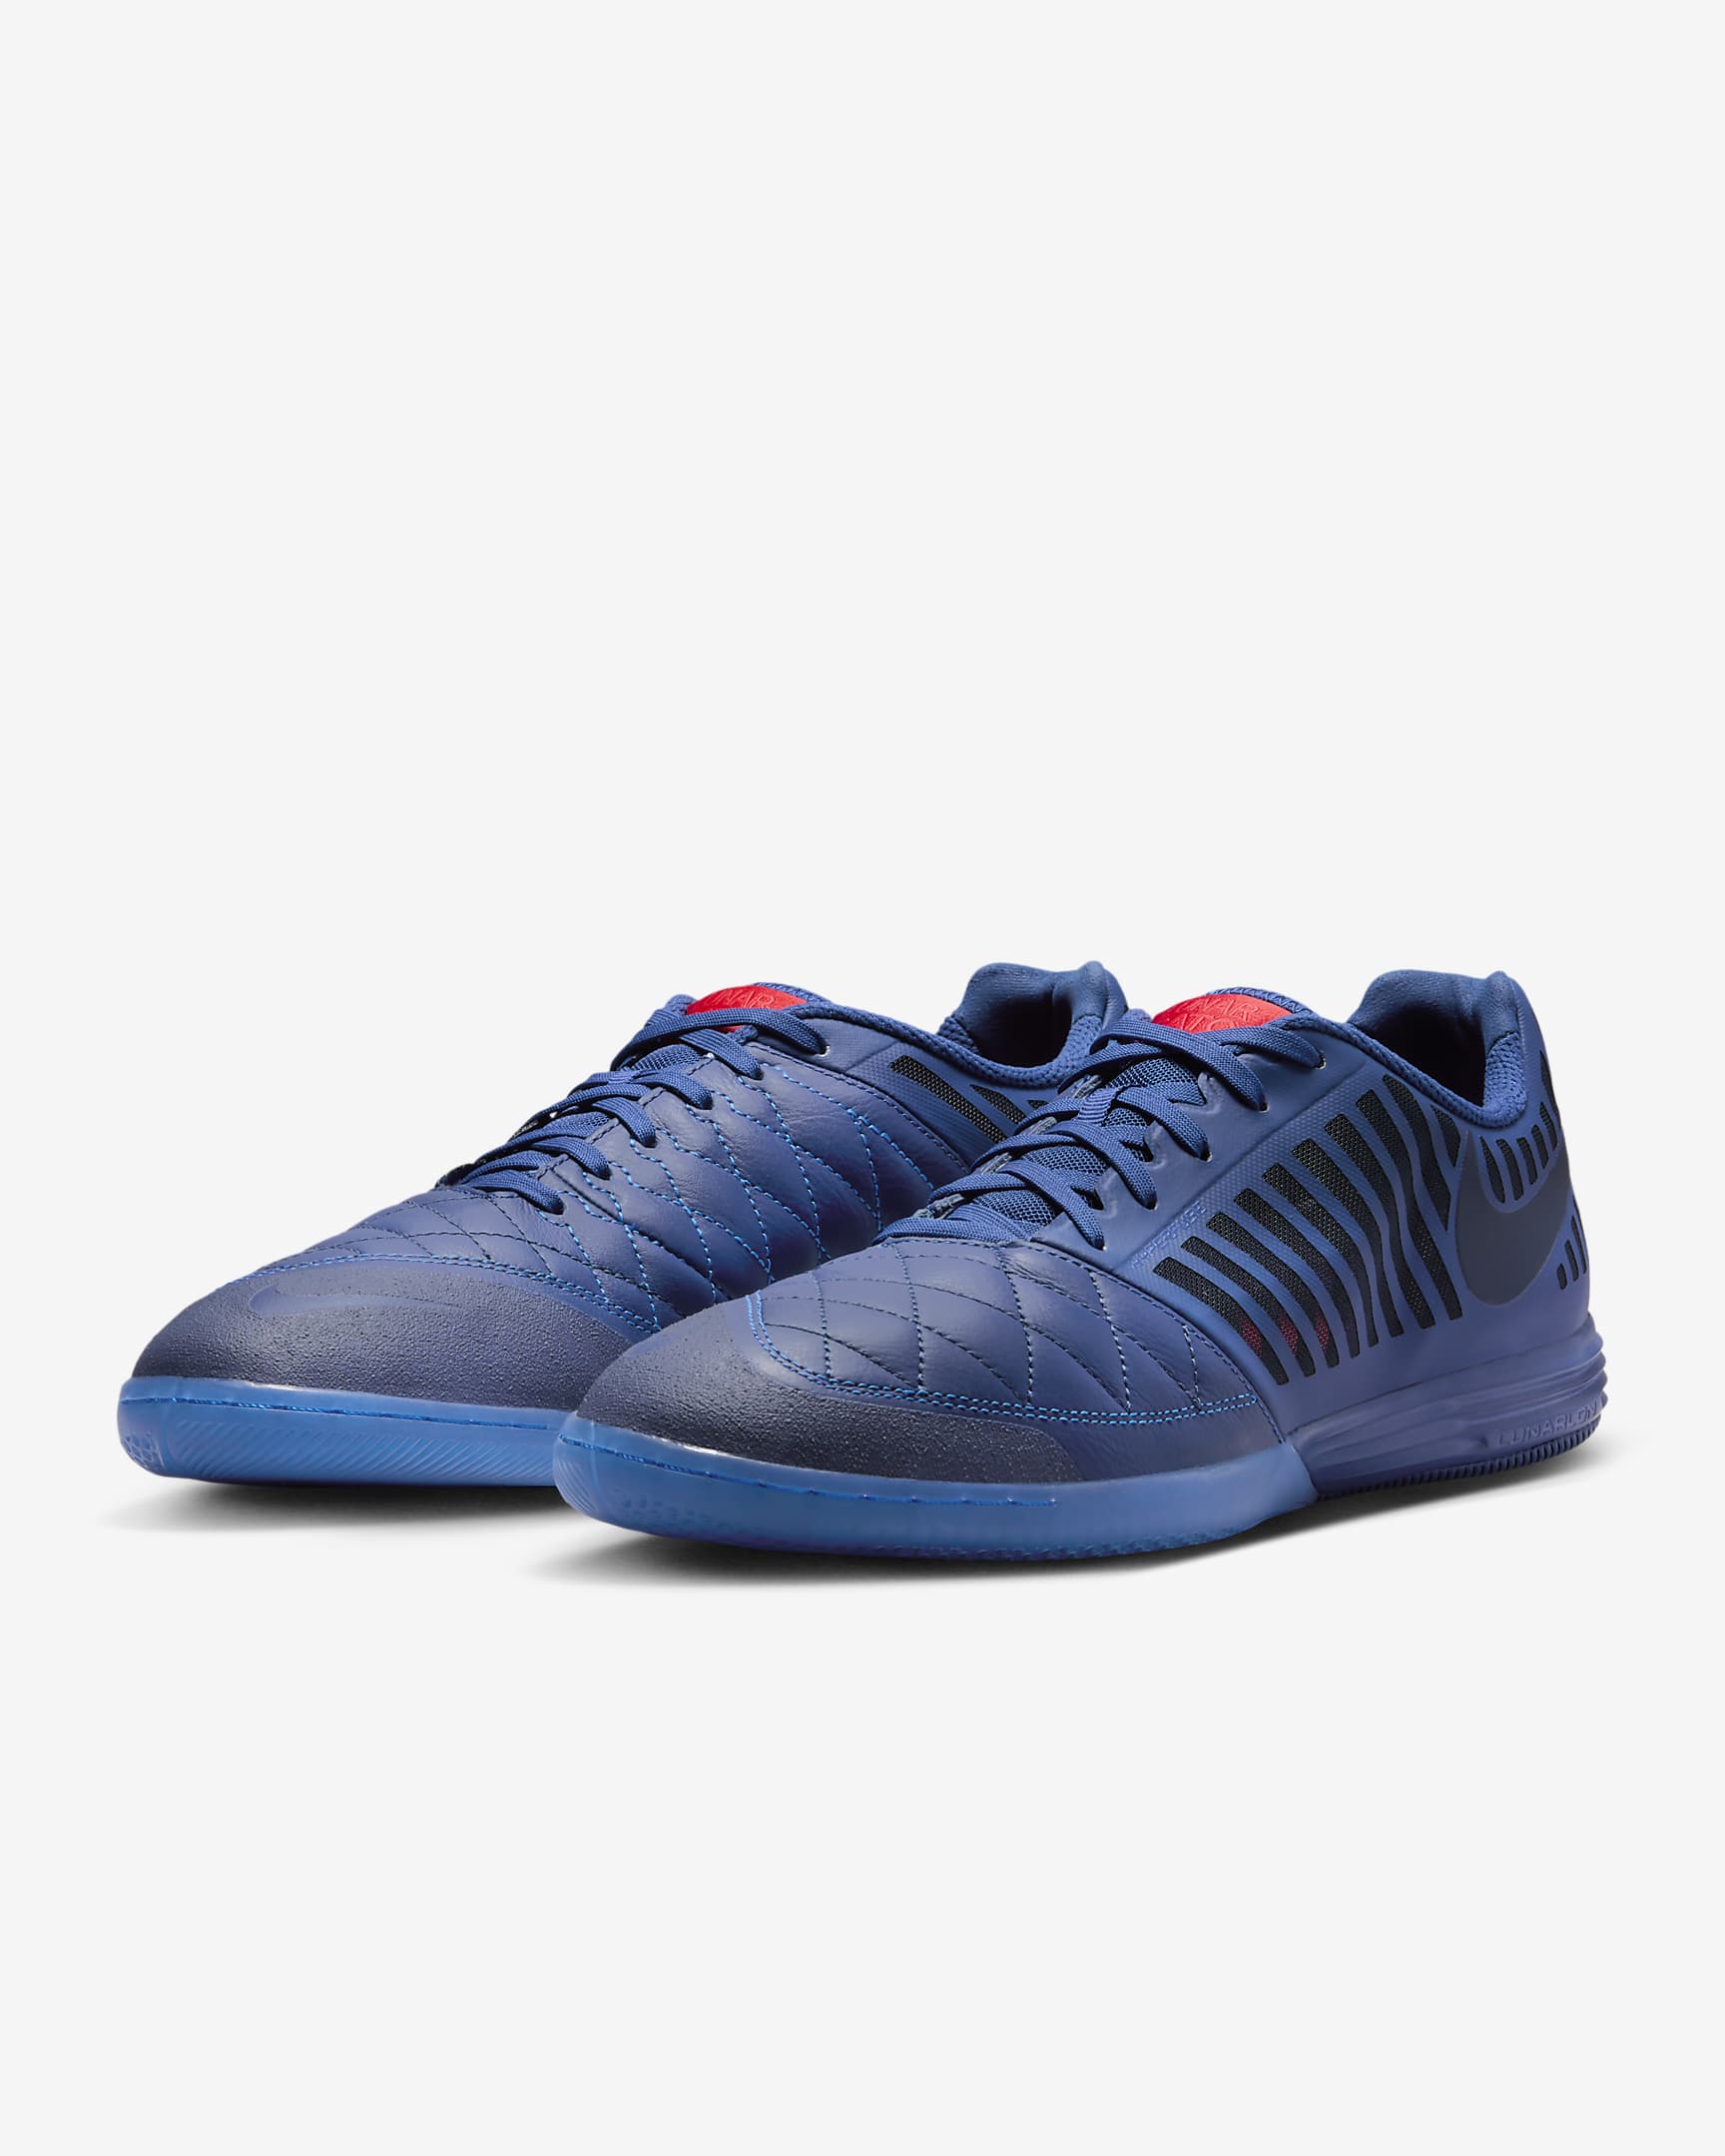 Nike Lunar Gato II Indoor Court Low-Top Football Shoes. Nike HR